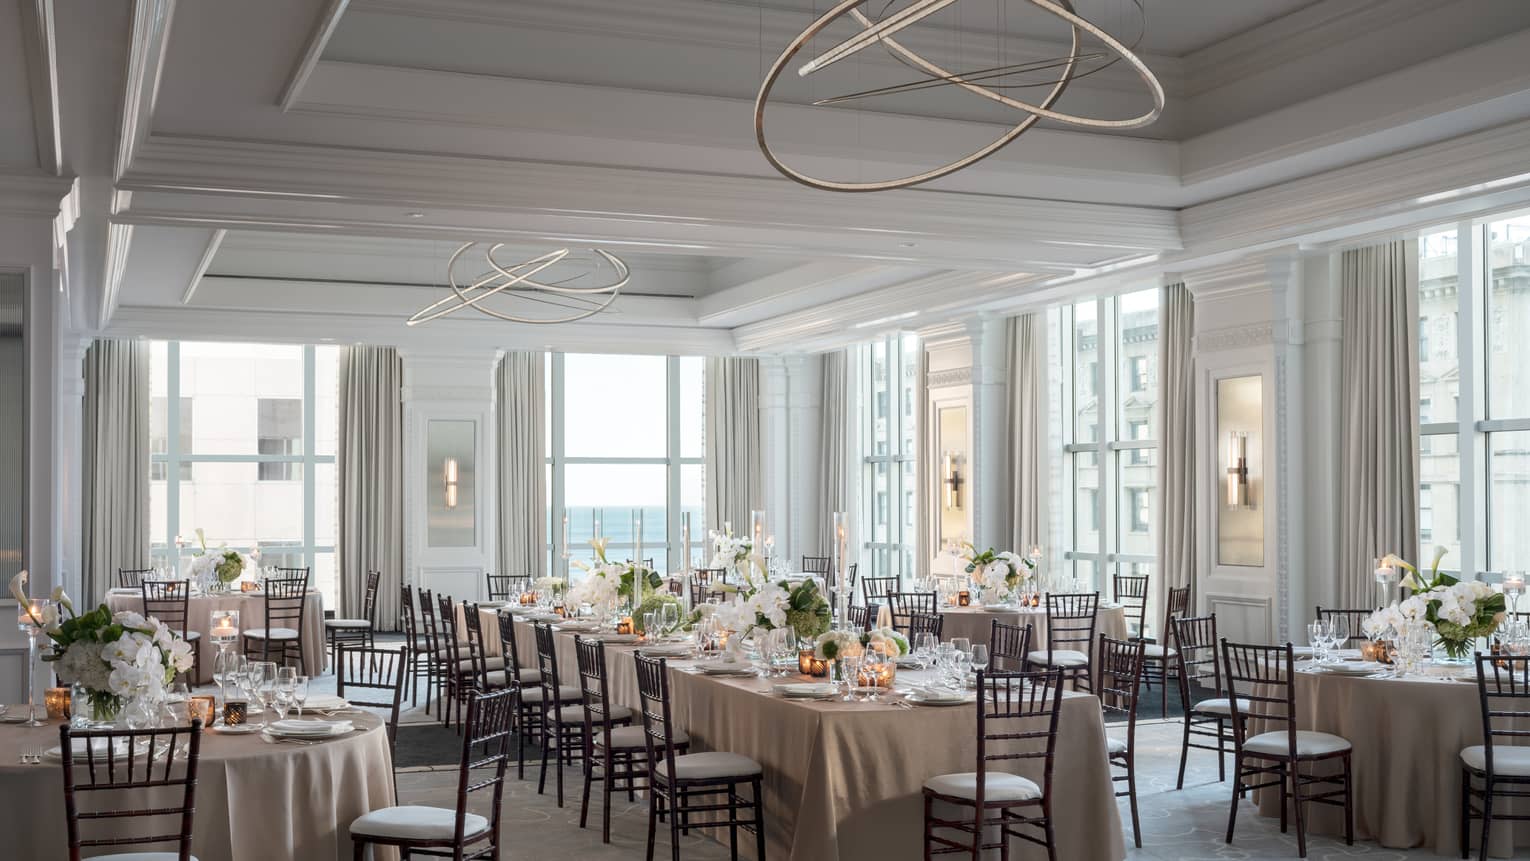 Ballroom with high ceilings and large windows, one long table surrounded by round tables